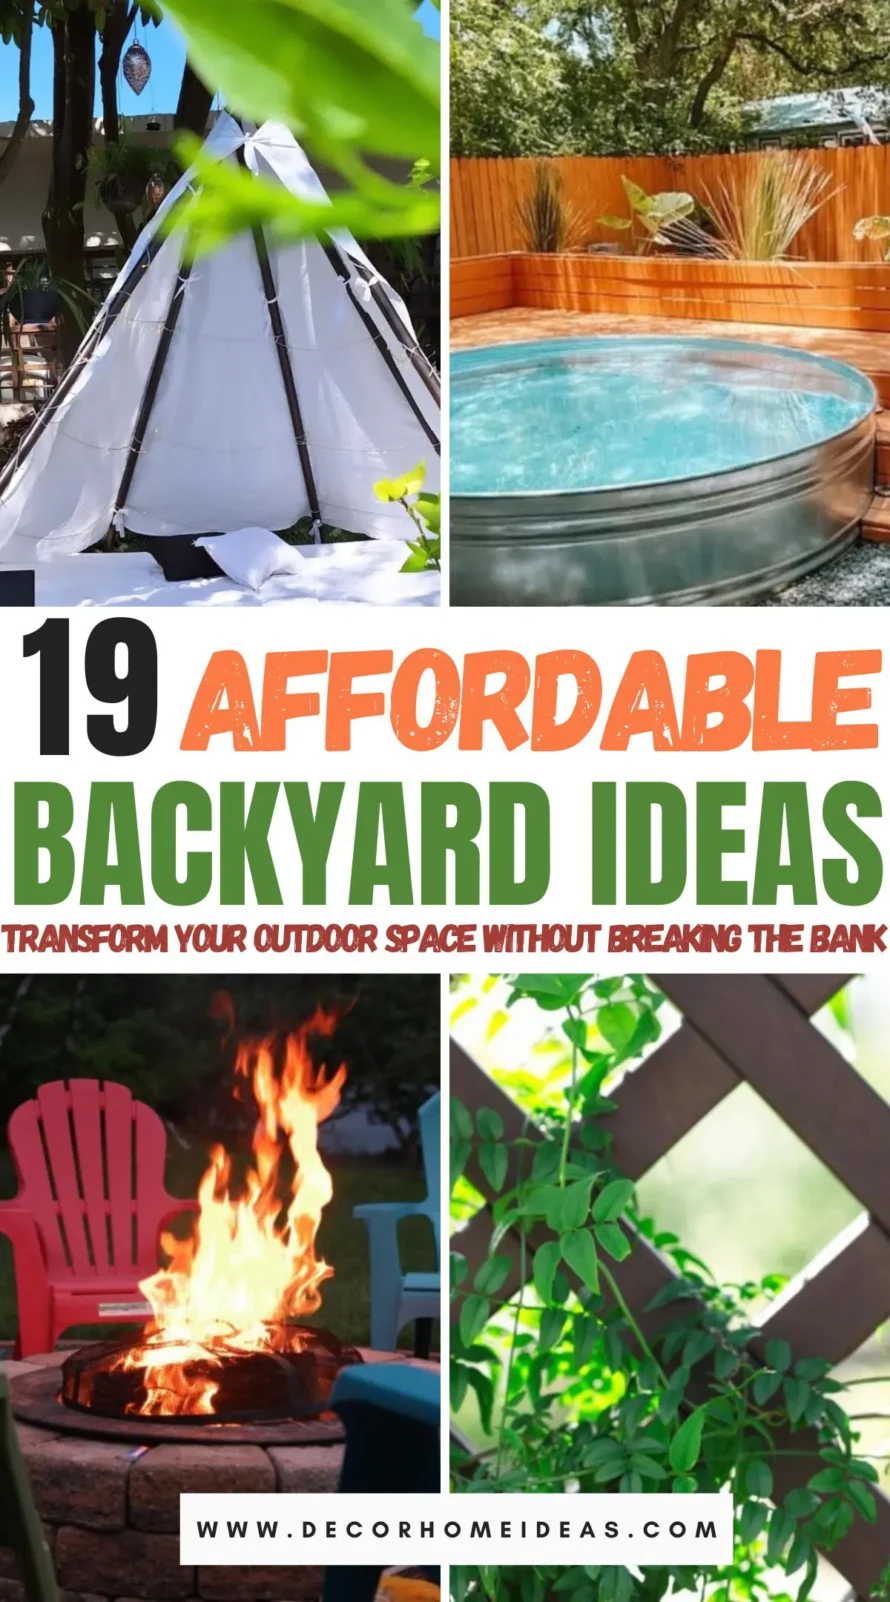 Transform your outdoor space with these 19 affordable backyard ideas! Discover creative and budget-friendly ways to revamp your backyard, from DIY projects and stylish decor to clever landscaping tips. Dive into this guide to make your backyard a personal oasis without breaking the bank!